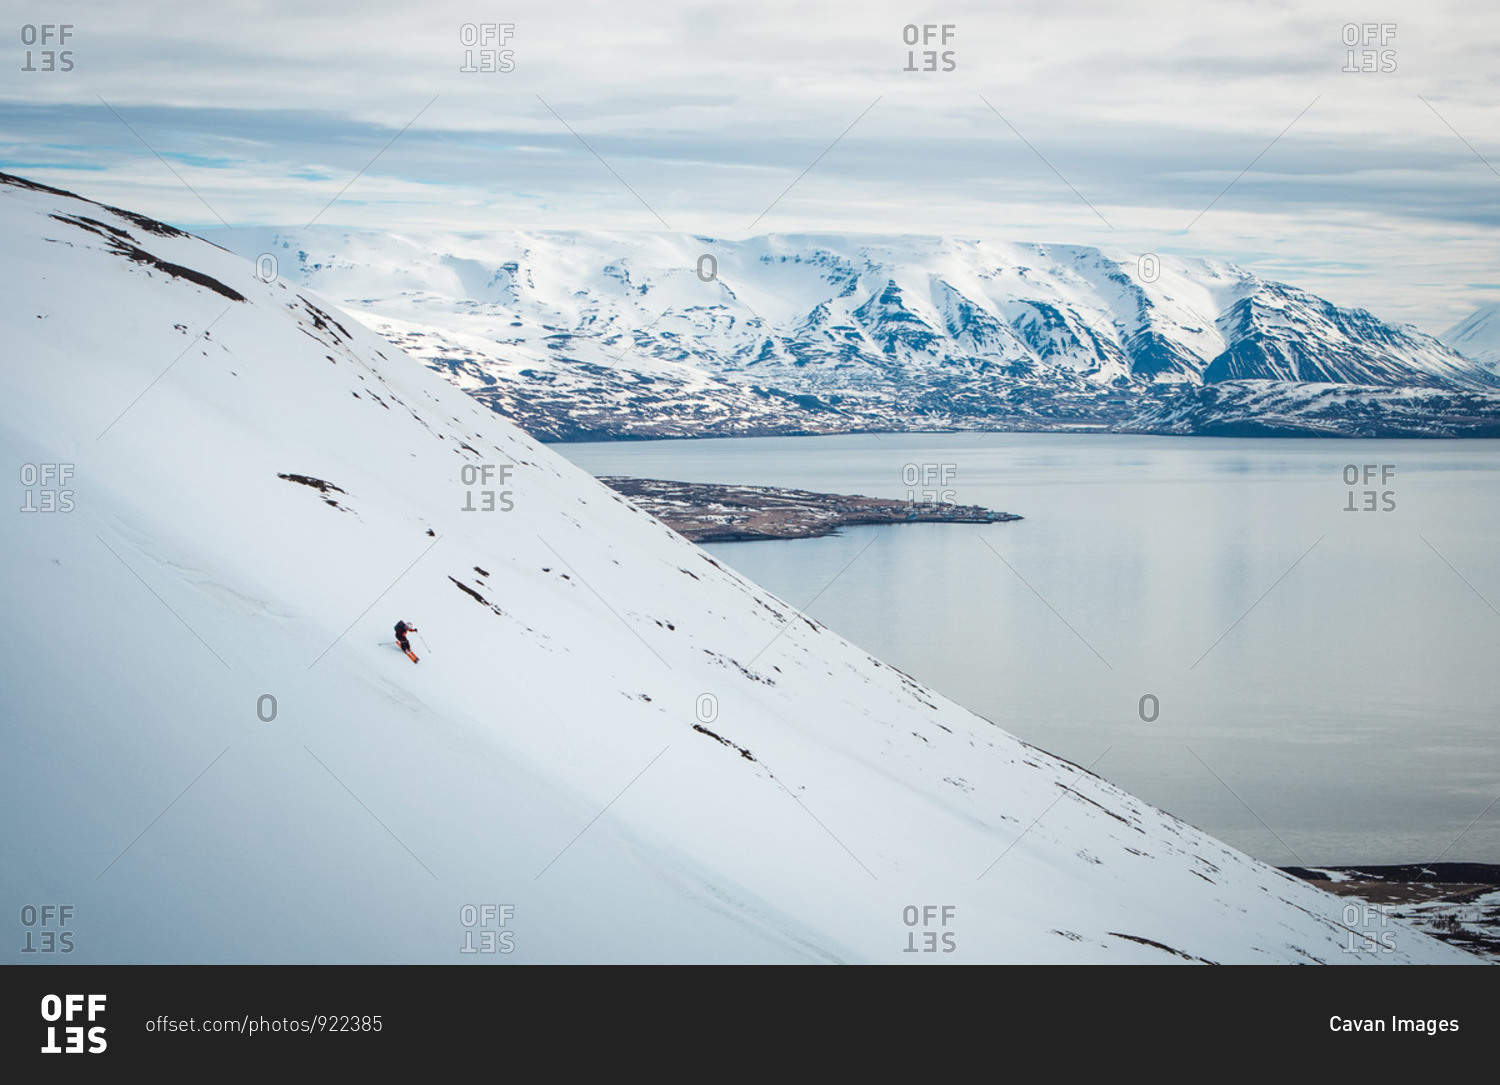 A man skiing down a mountain with snowy mountains and ocean behind